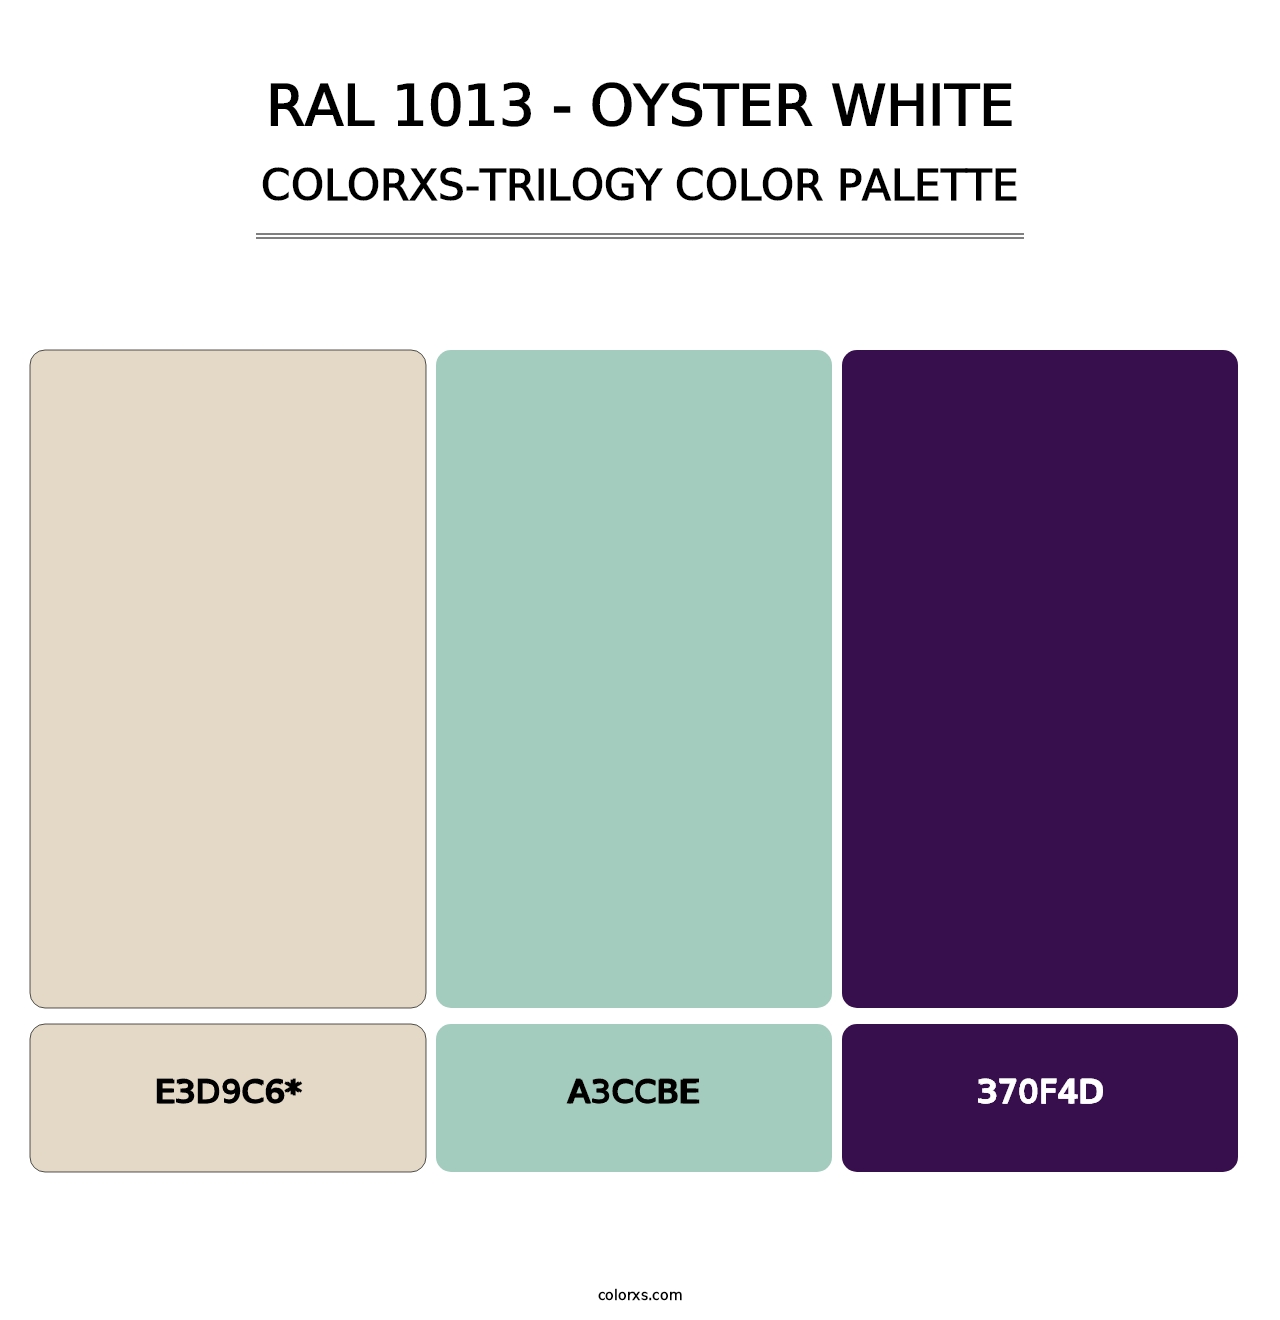 RAL 1013 - Oyster White - Colorxs Trilogy Palette